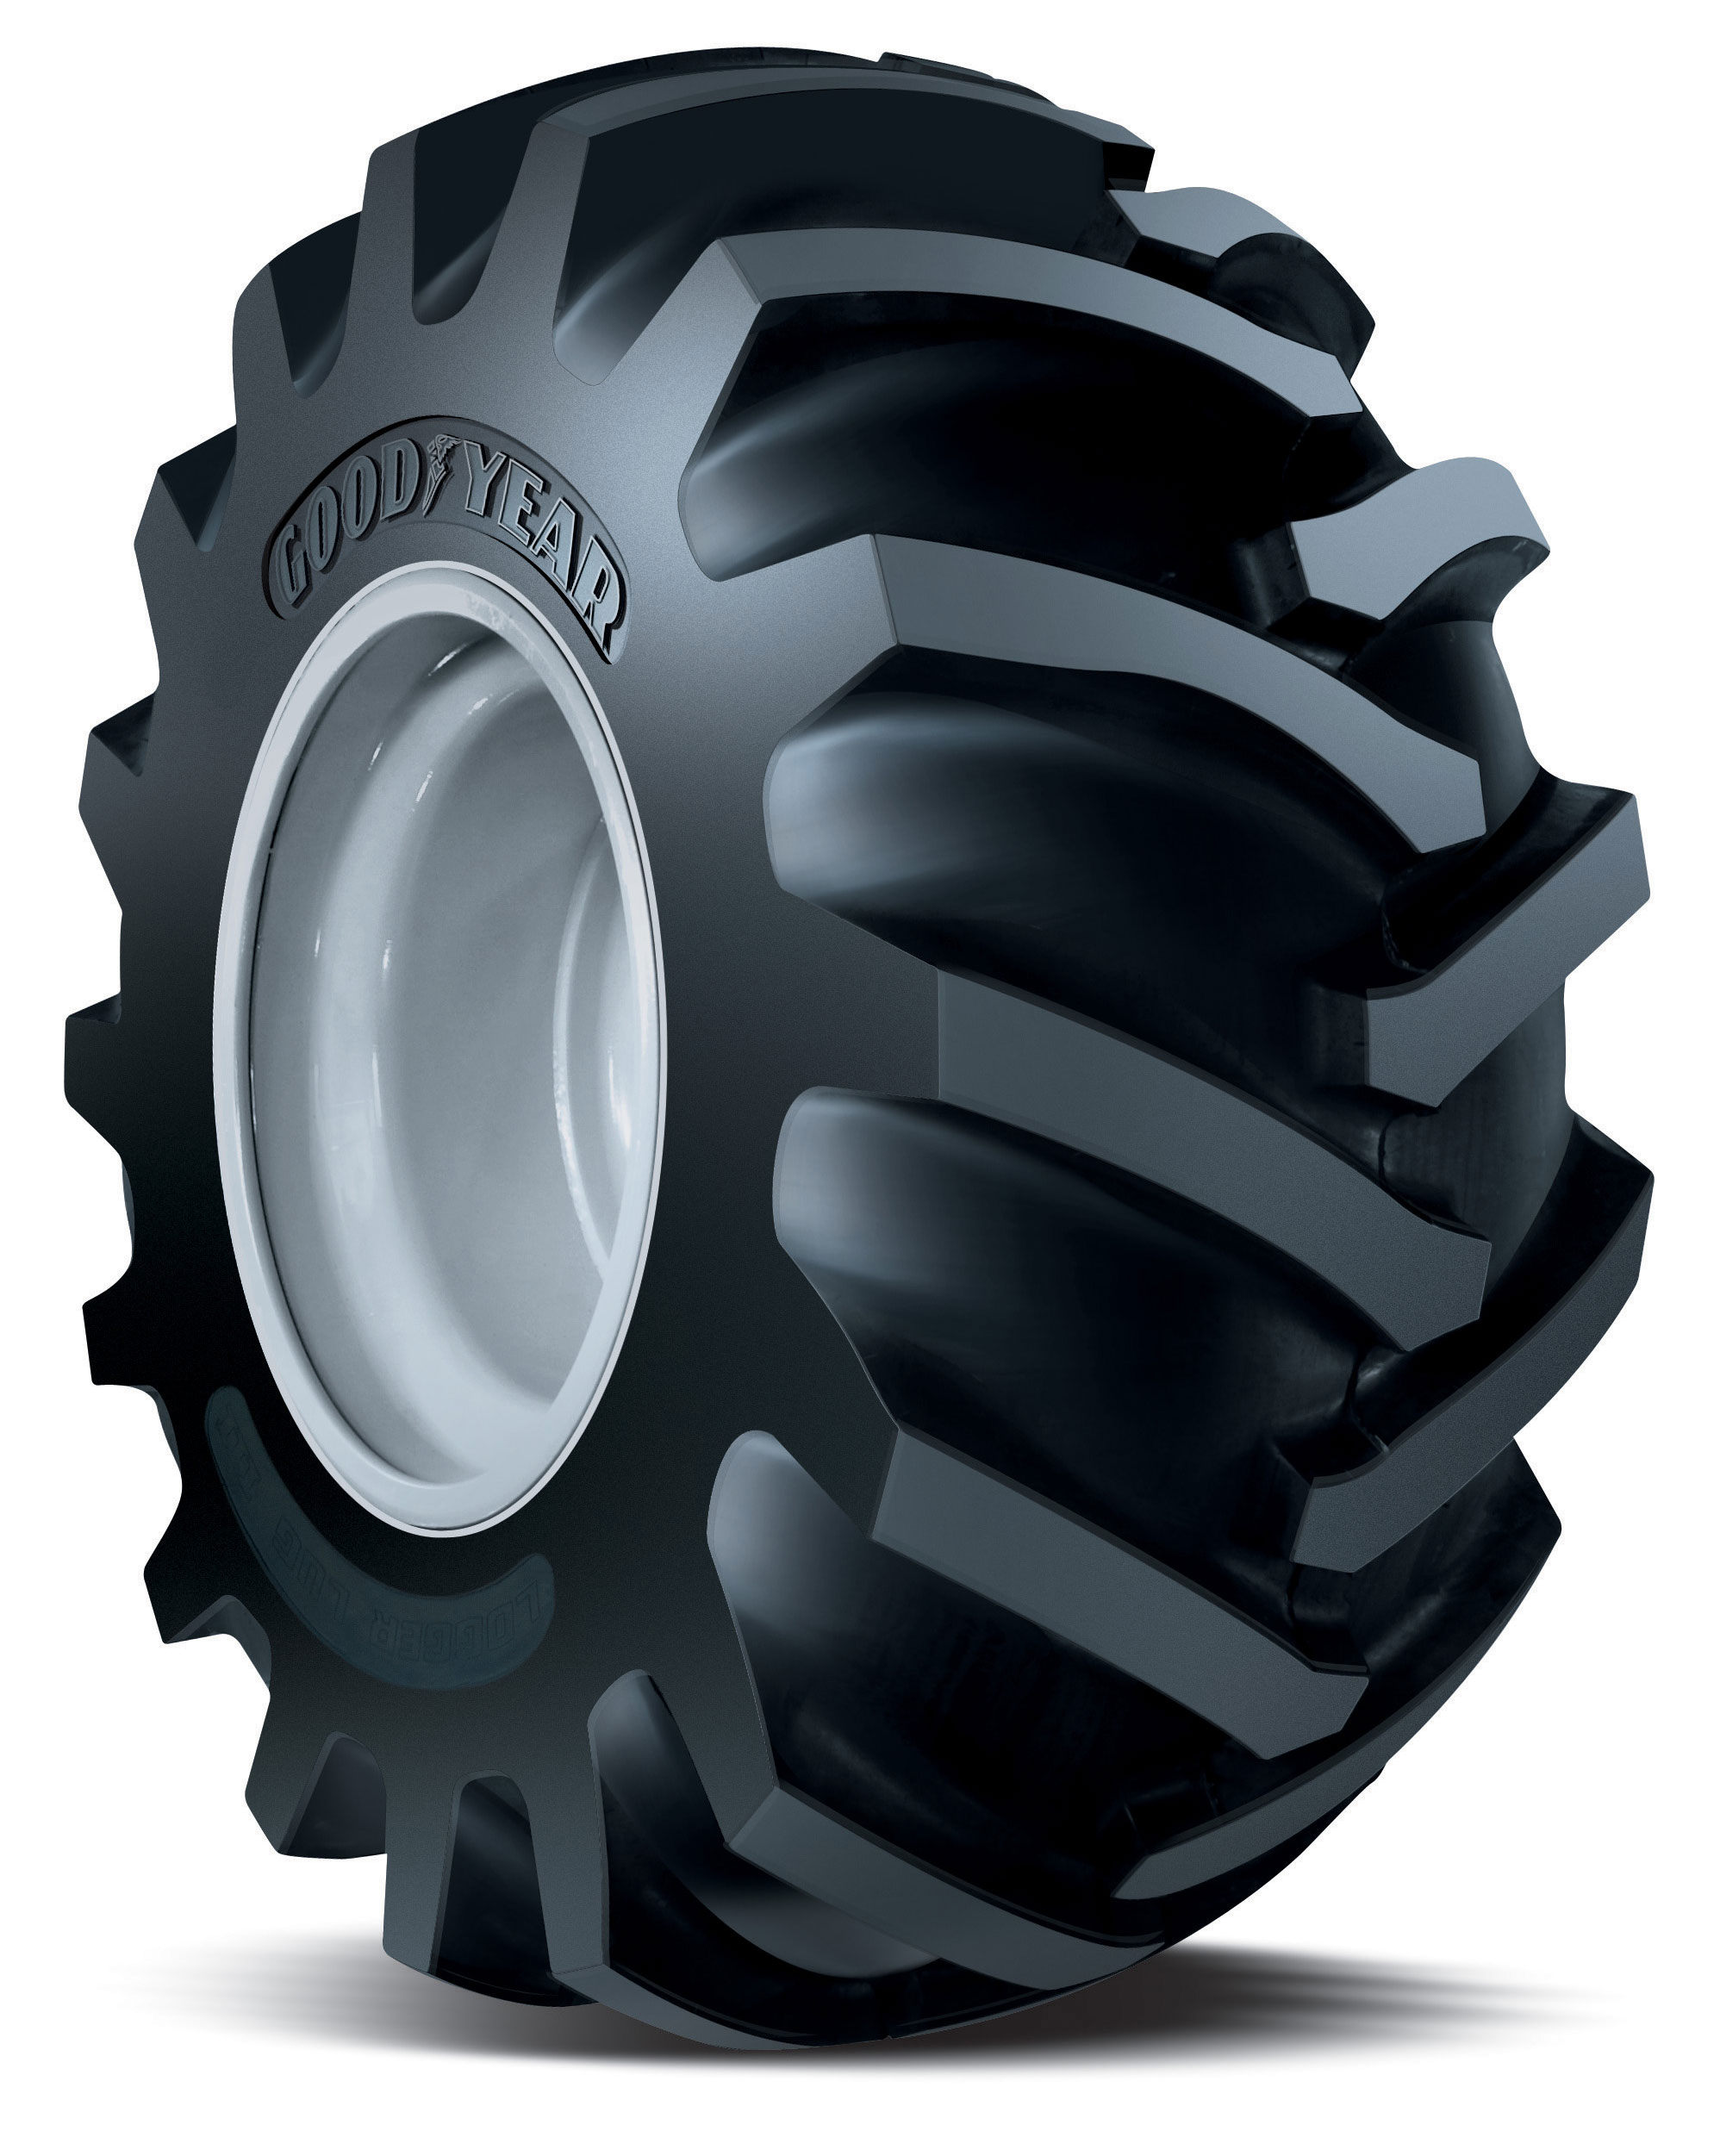 Forestry Tires